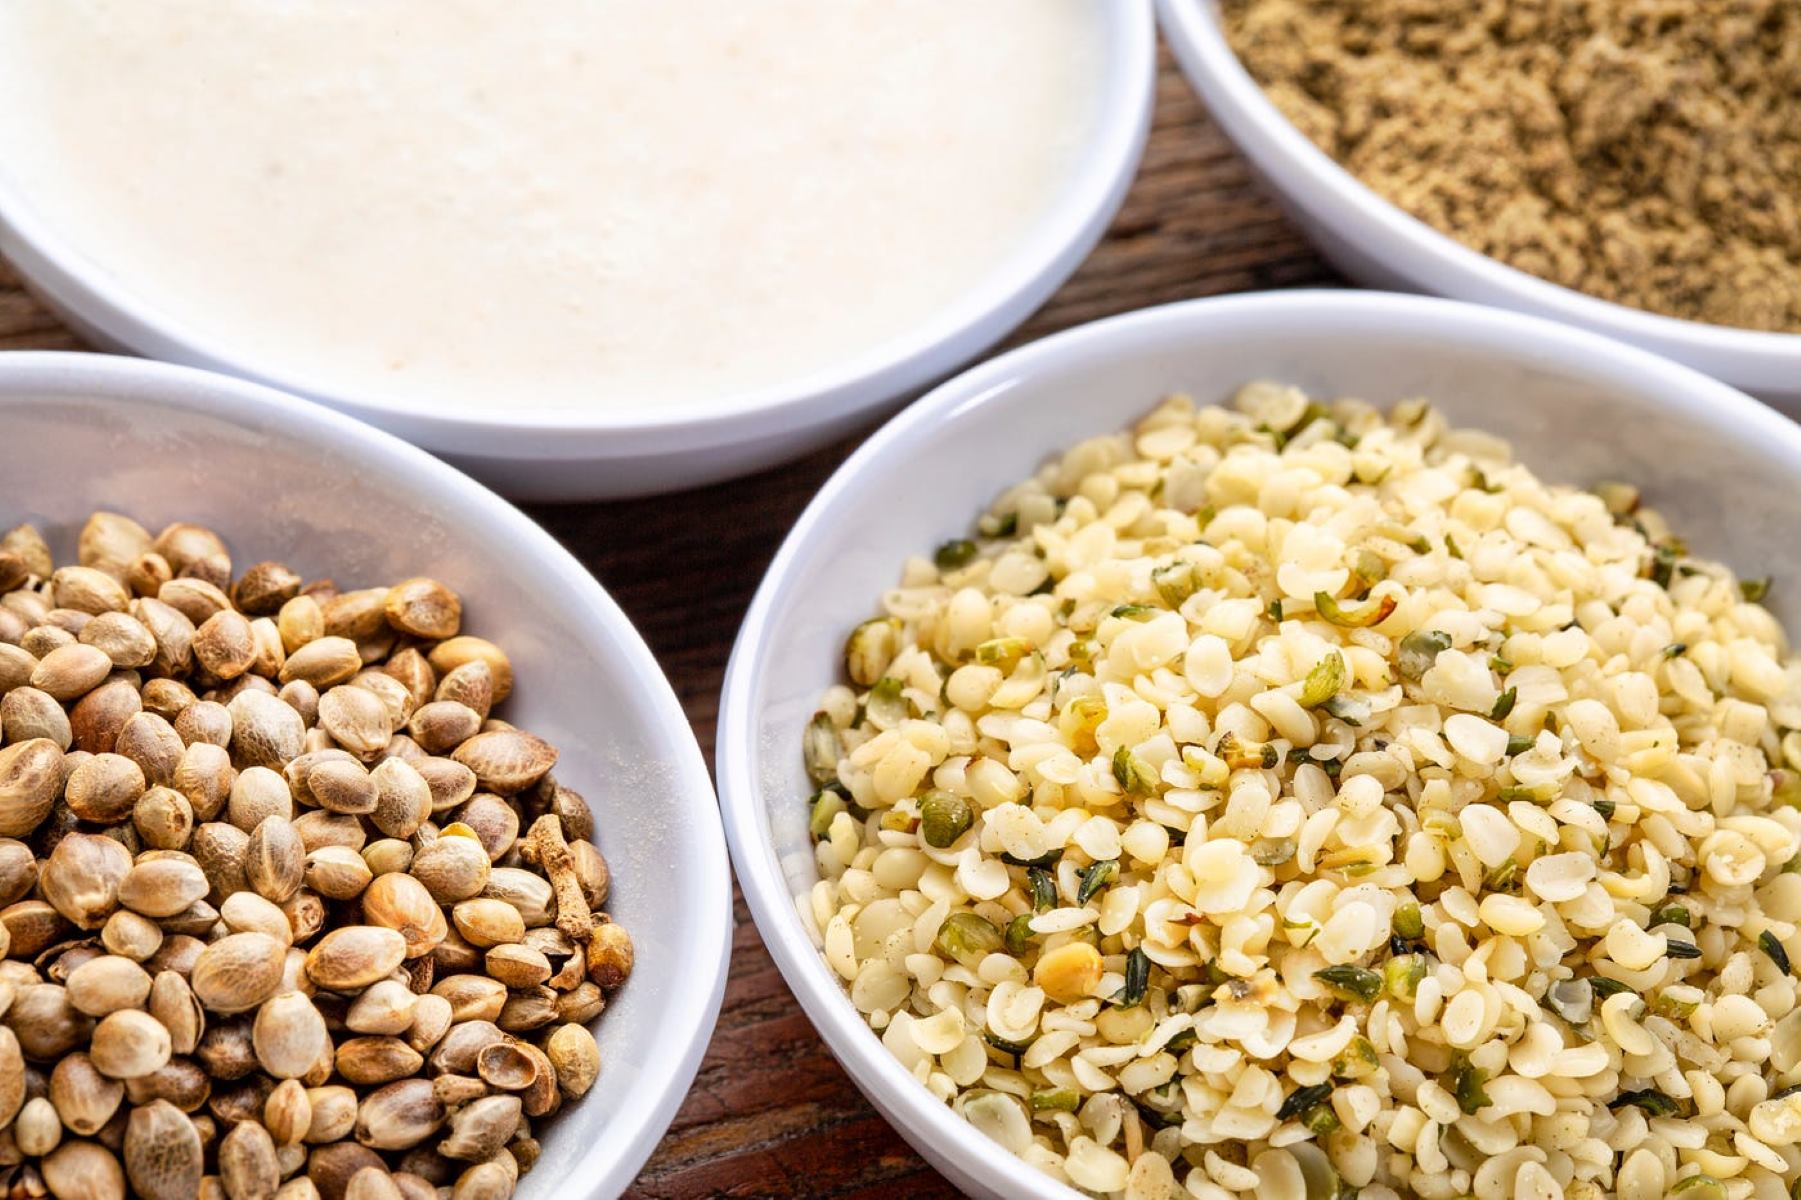 What Is The Difference Between Hemp Hearts And Hemp Seeds